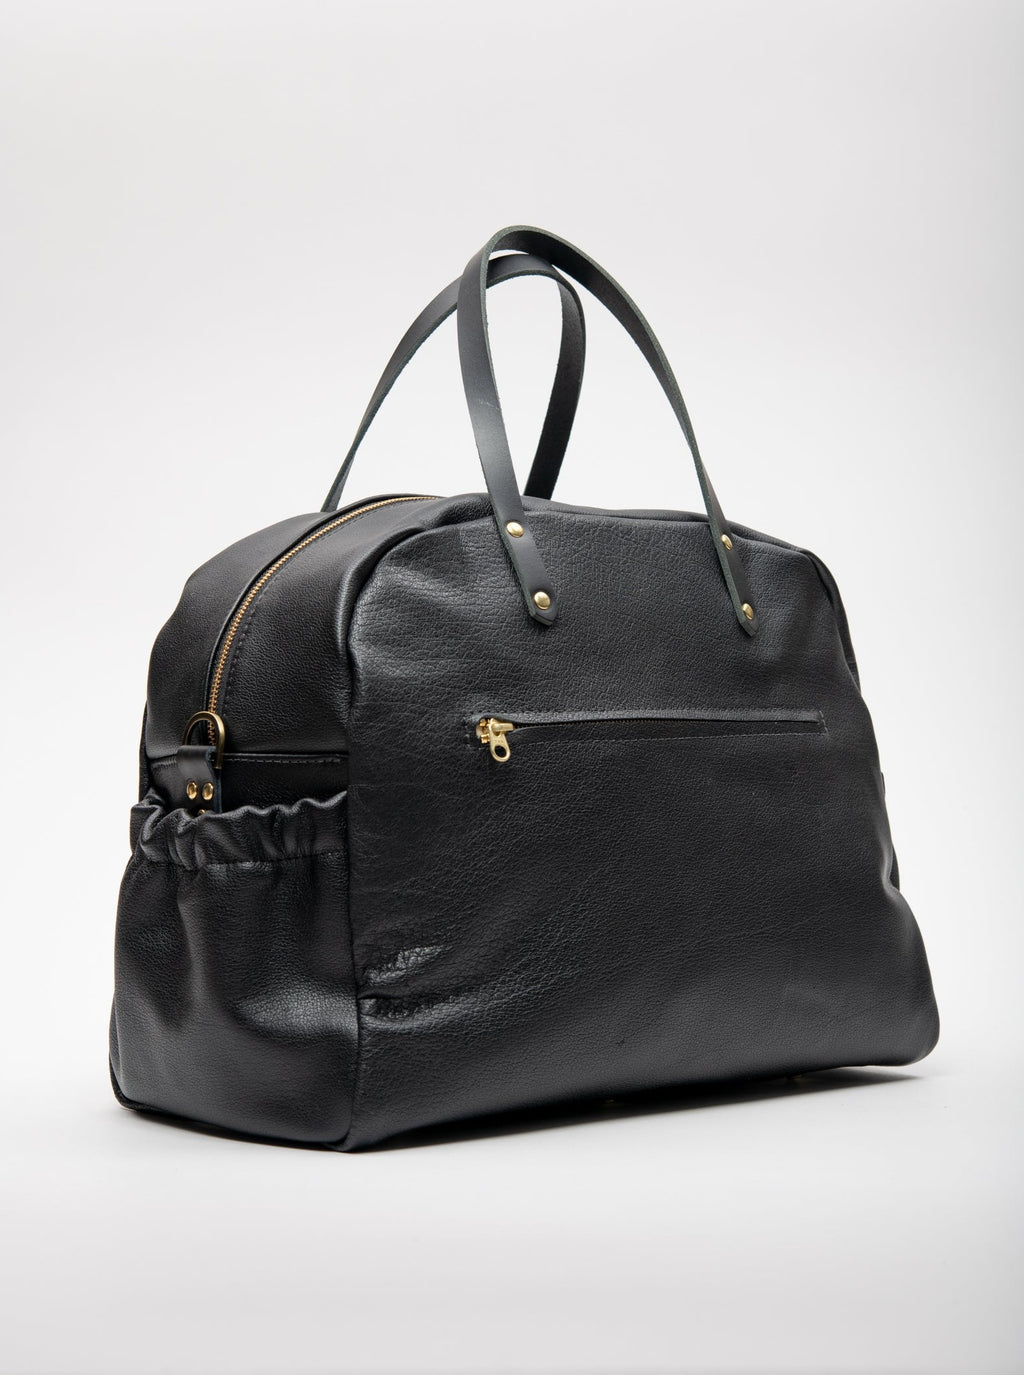 Veinage Leather travel or maternity bag multifunctional CIAO made to order, handmade in Montreal Canada